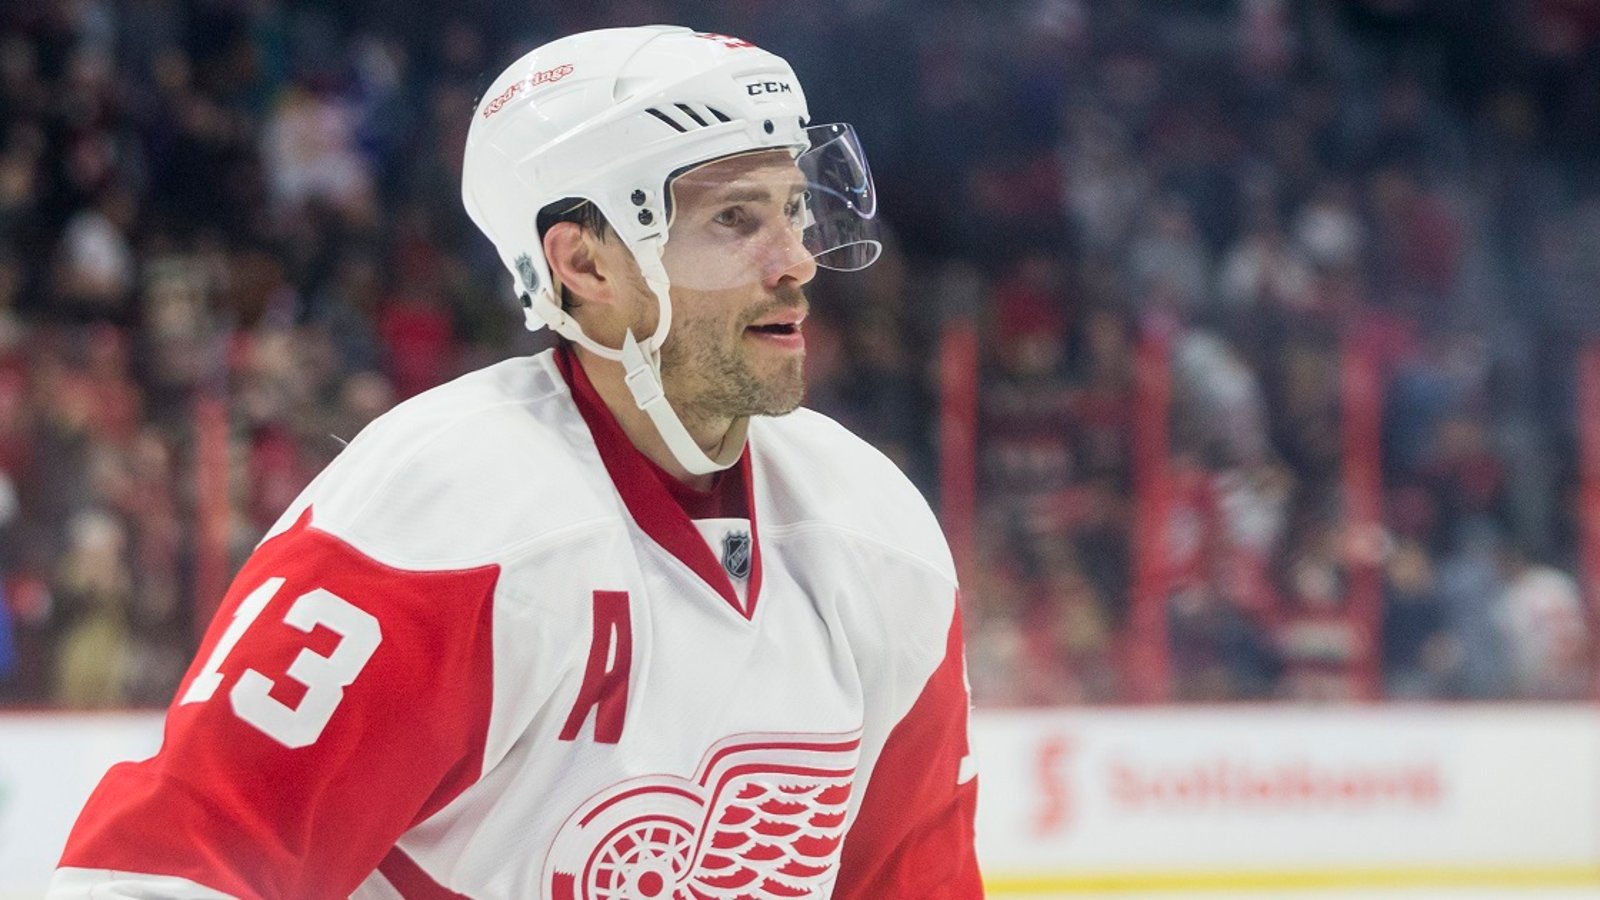 Report: Red Wings name replacement for former alternate captain Pavel Datsyuk.